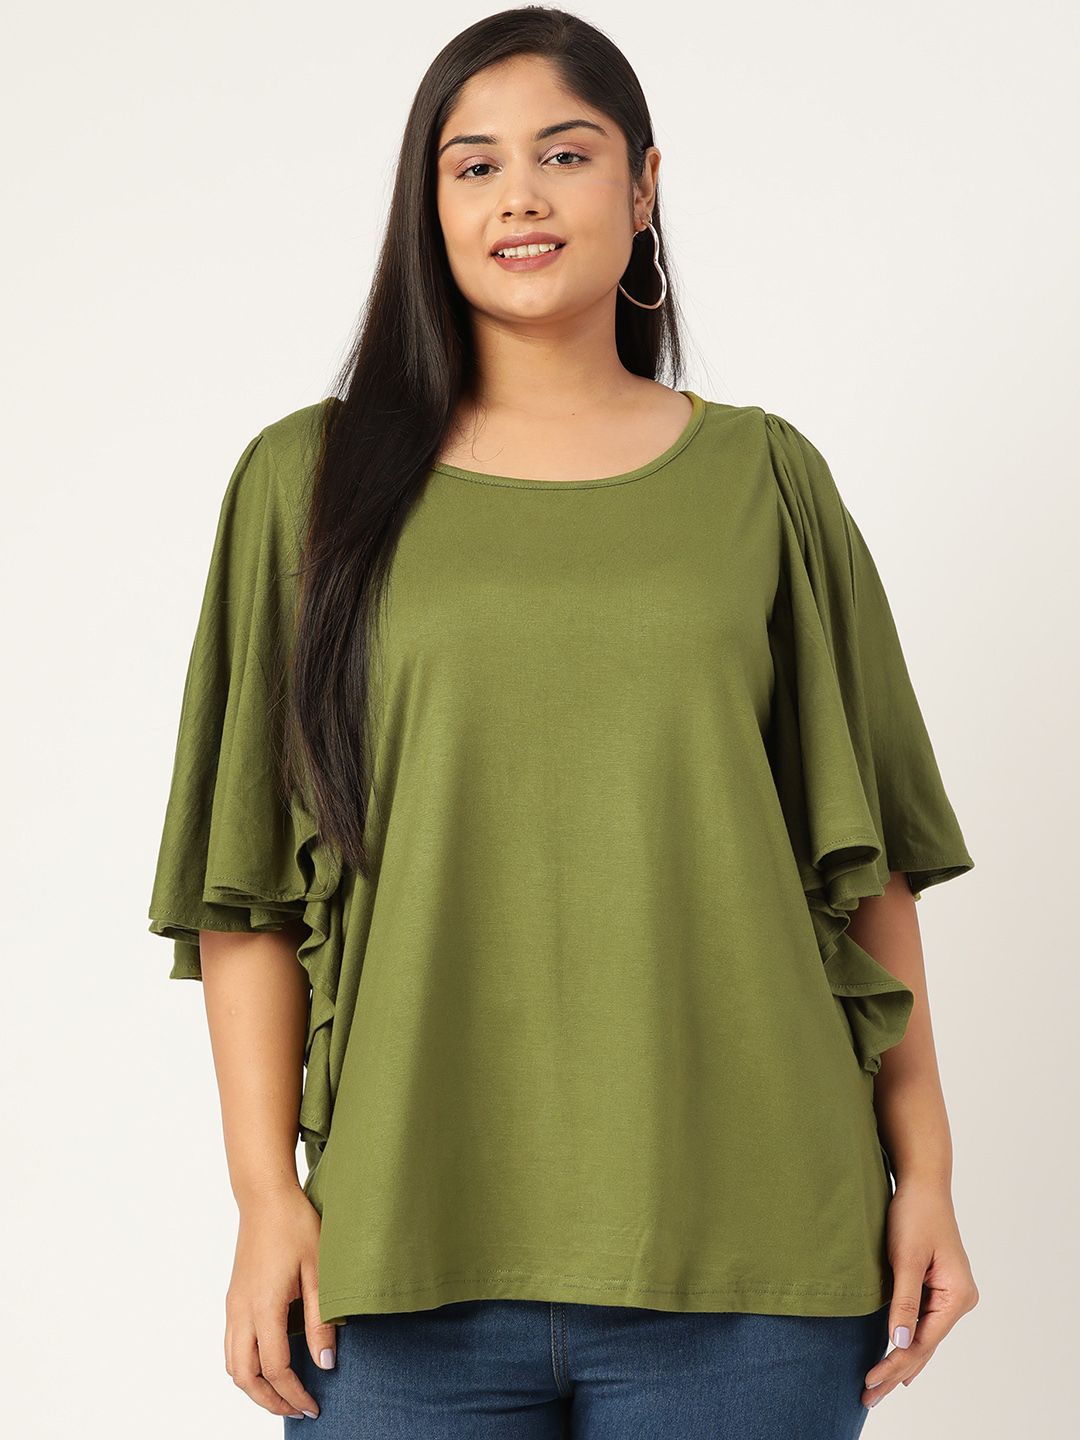 theRebelinme Green Solid Plus Size Top Price in India